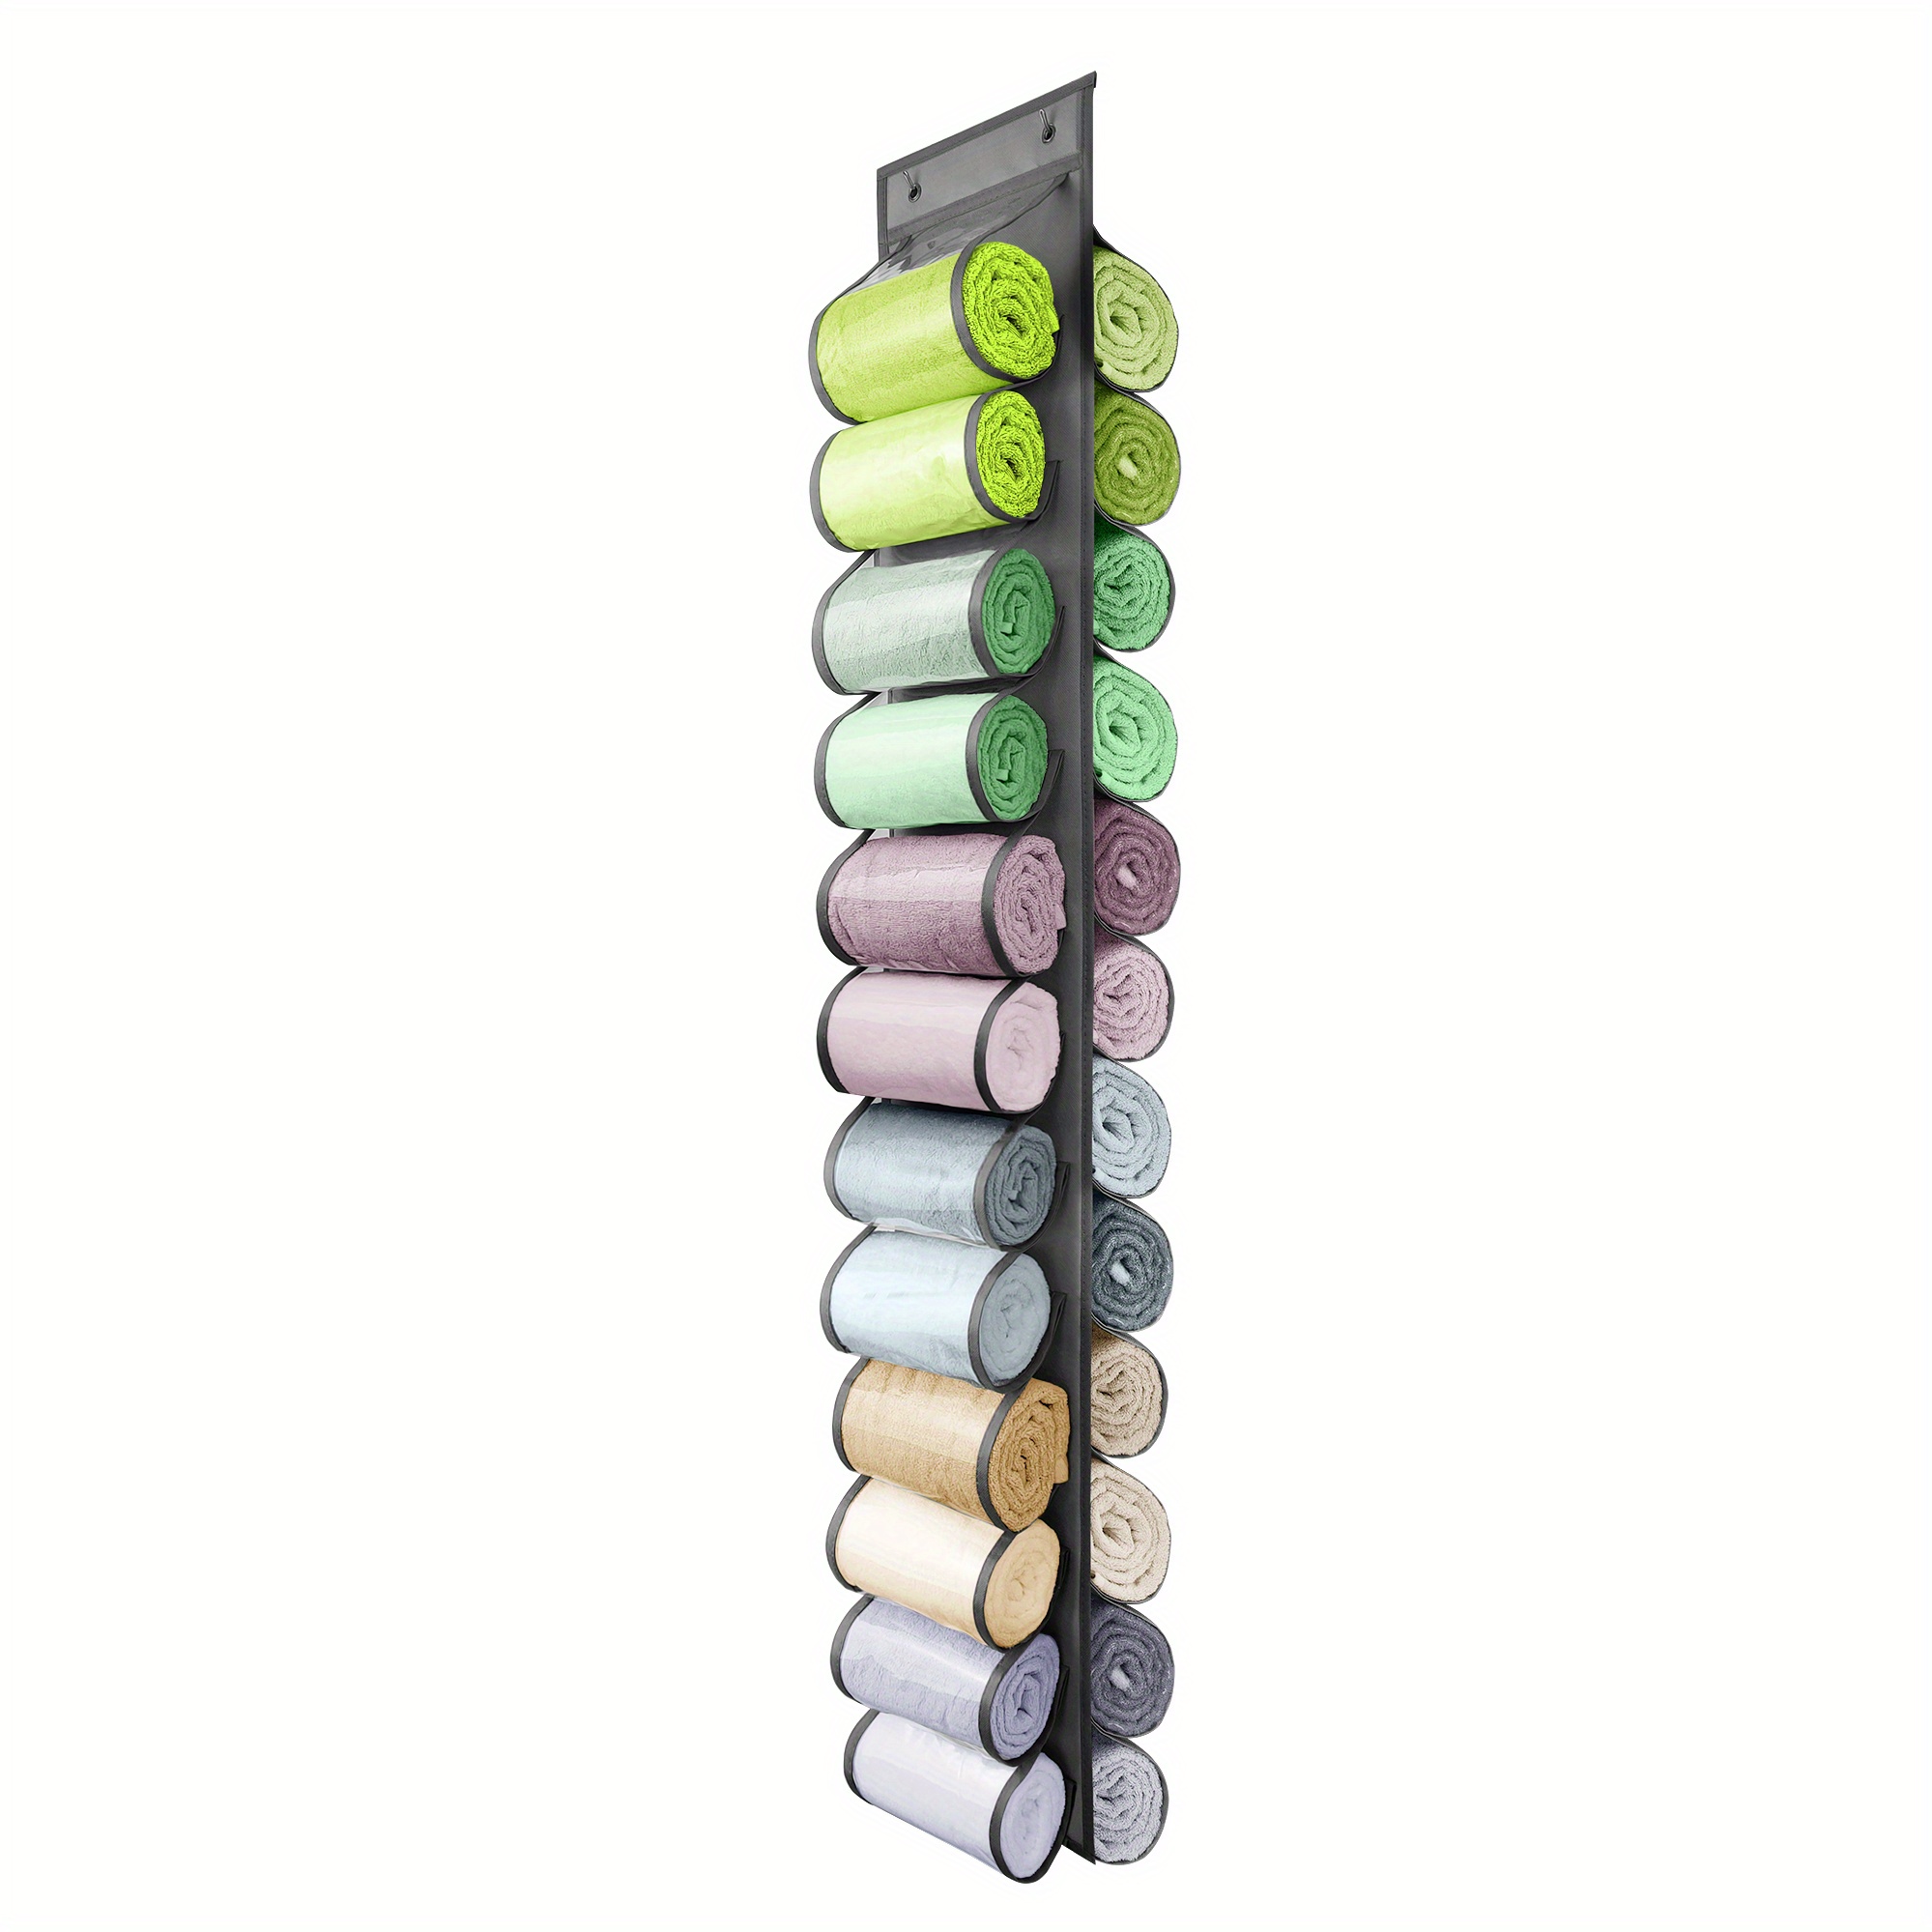 24 Compartments Vinyl Roll Storage Organizer for Hang Pocket